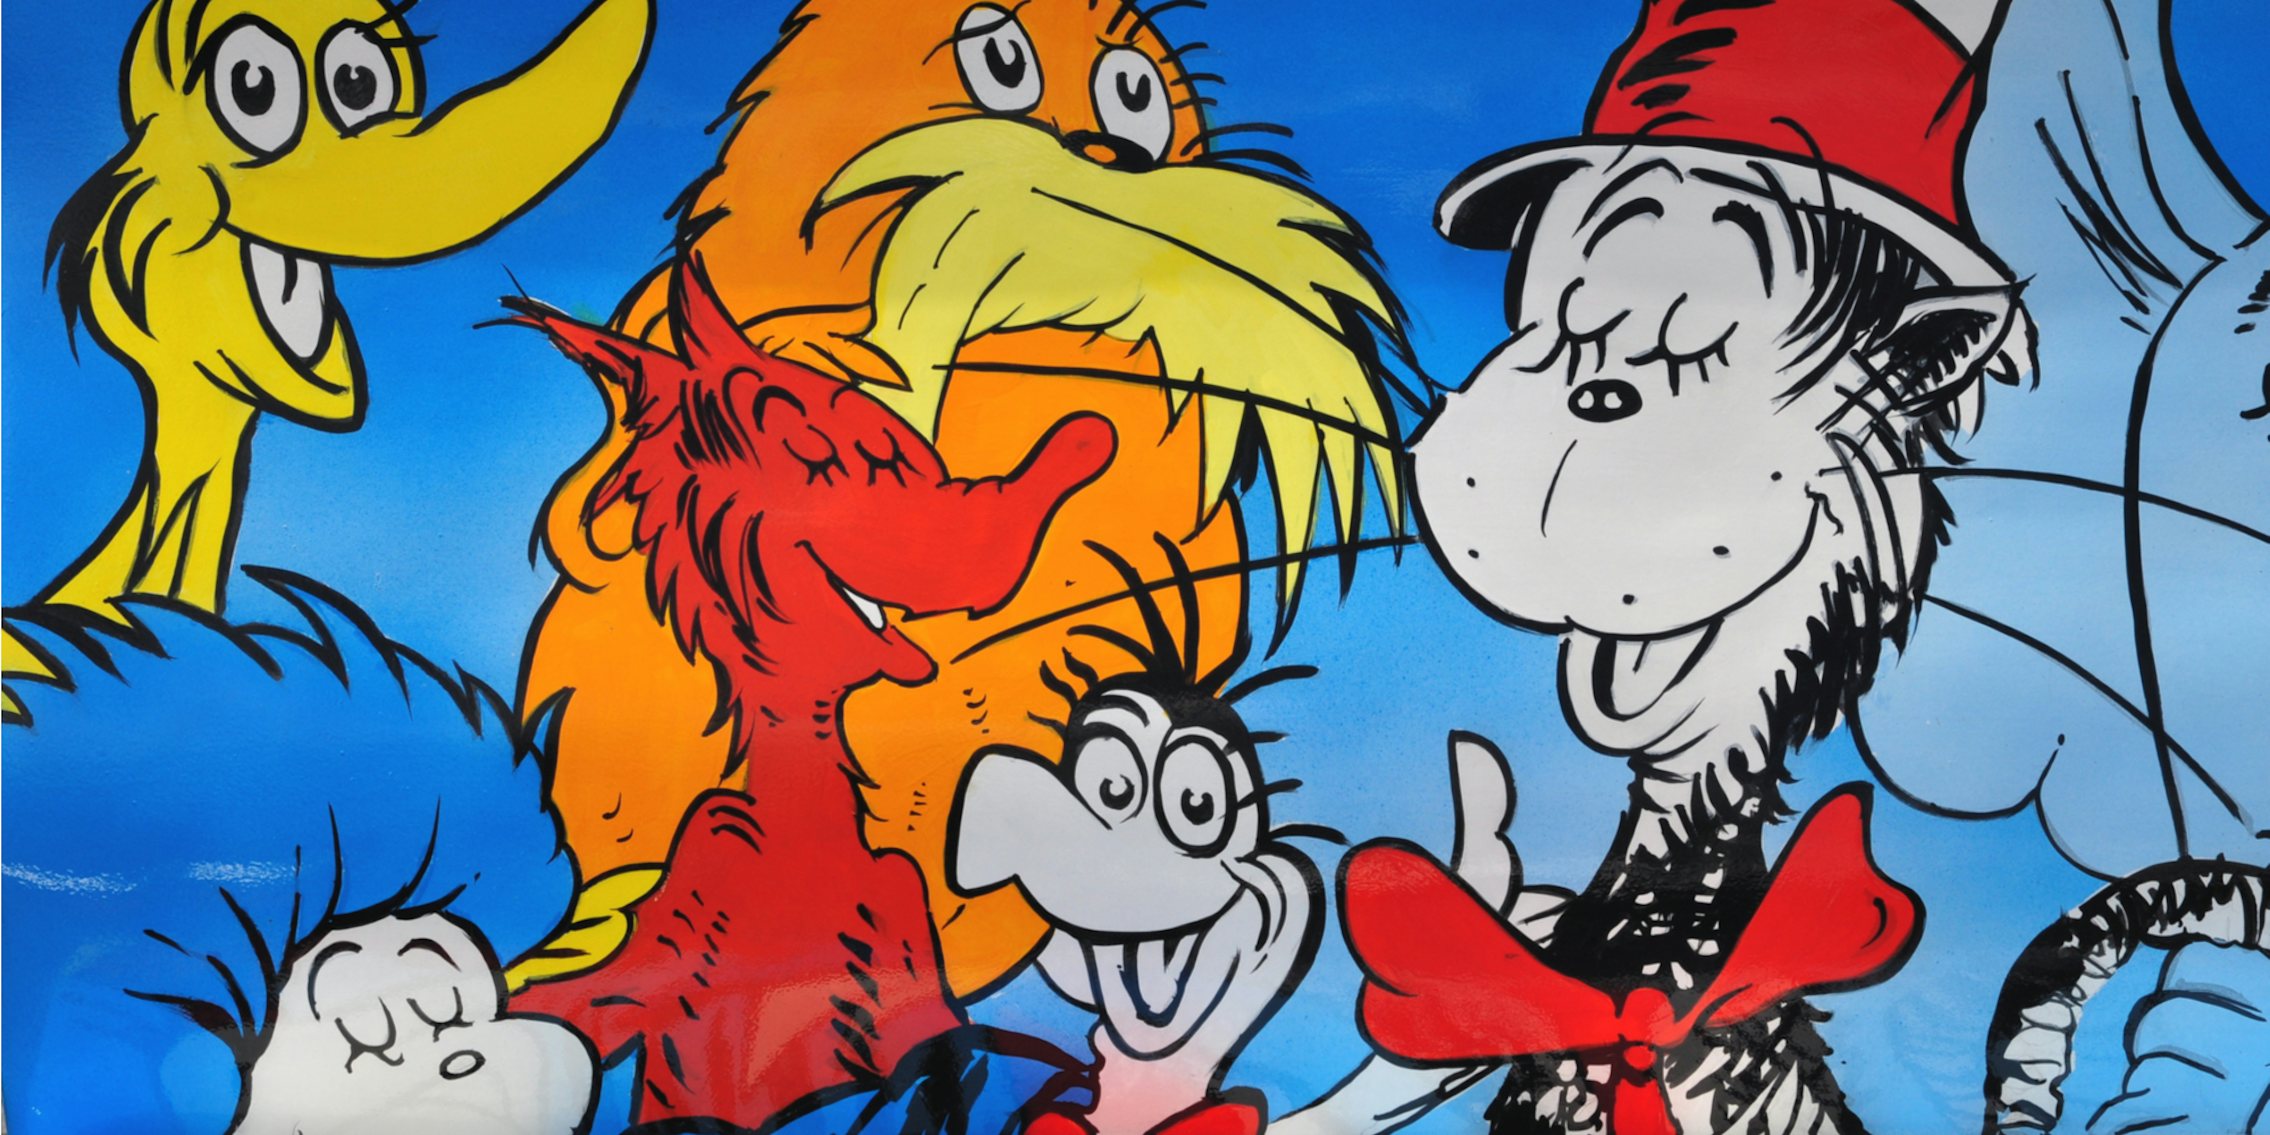 Conservatives falsely claim that Dr. Seuss is 'banned' from schools.